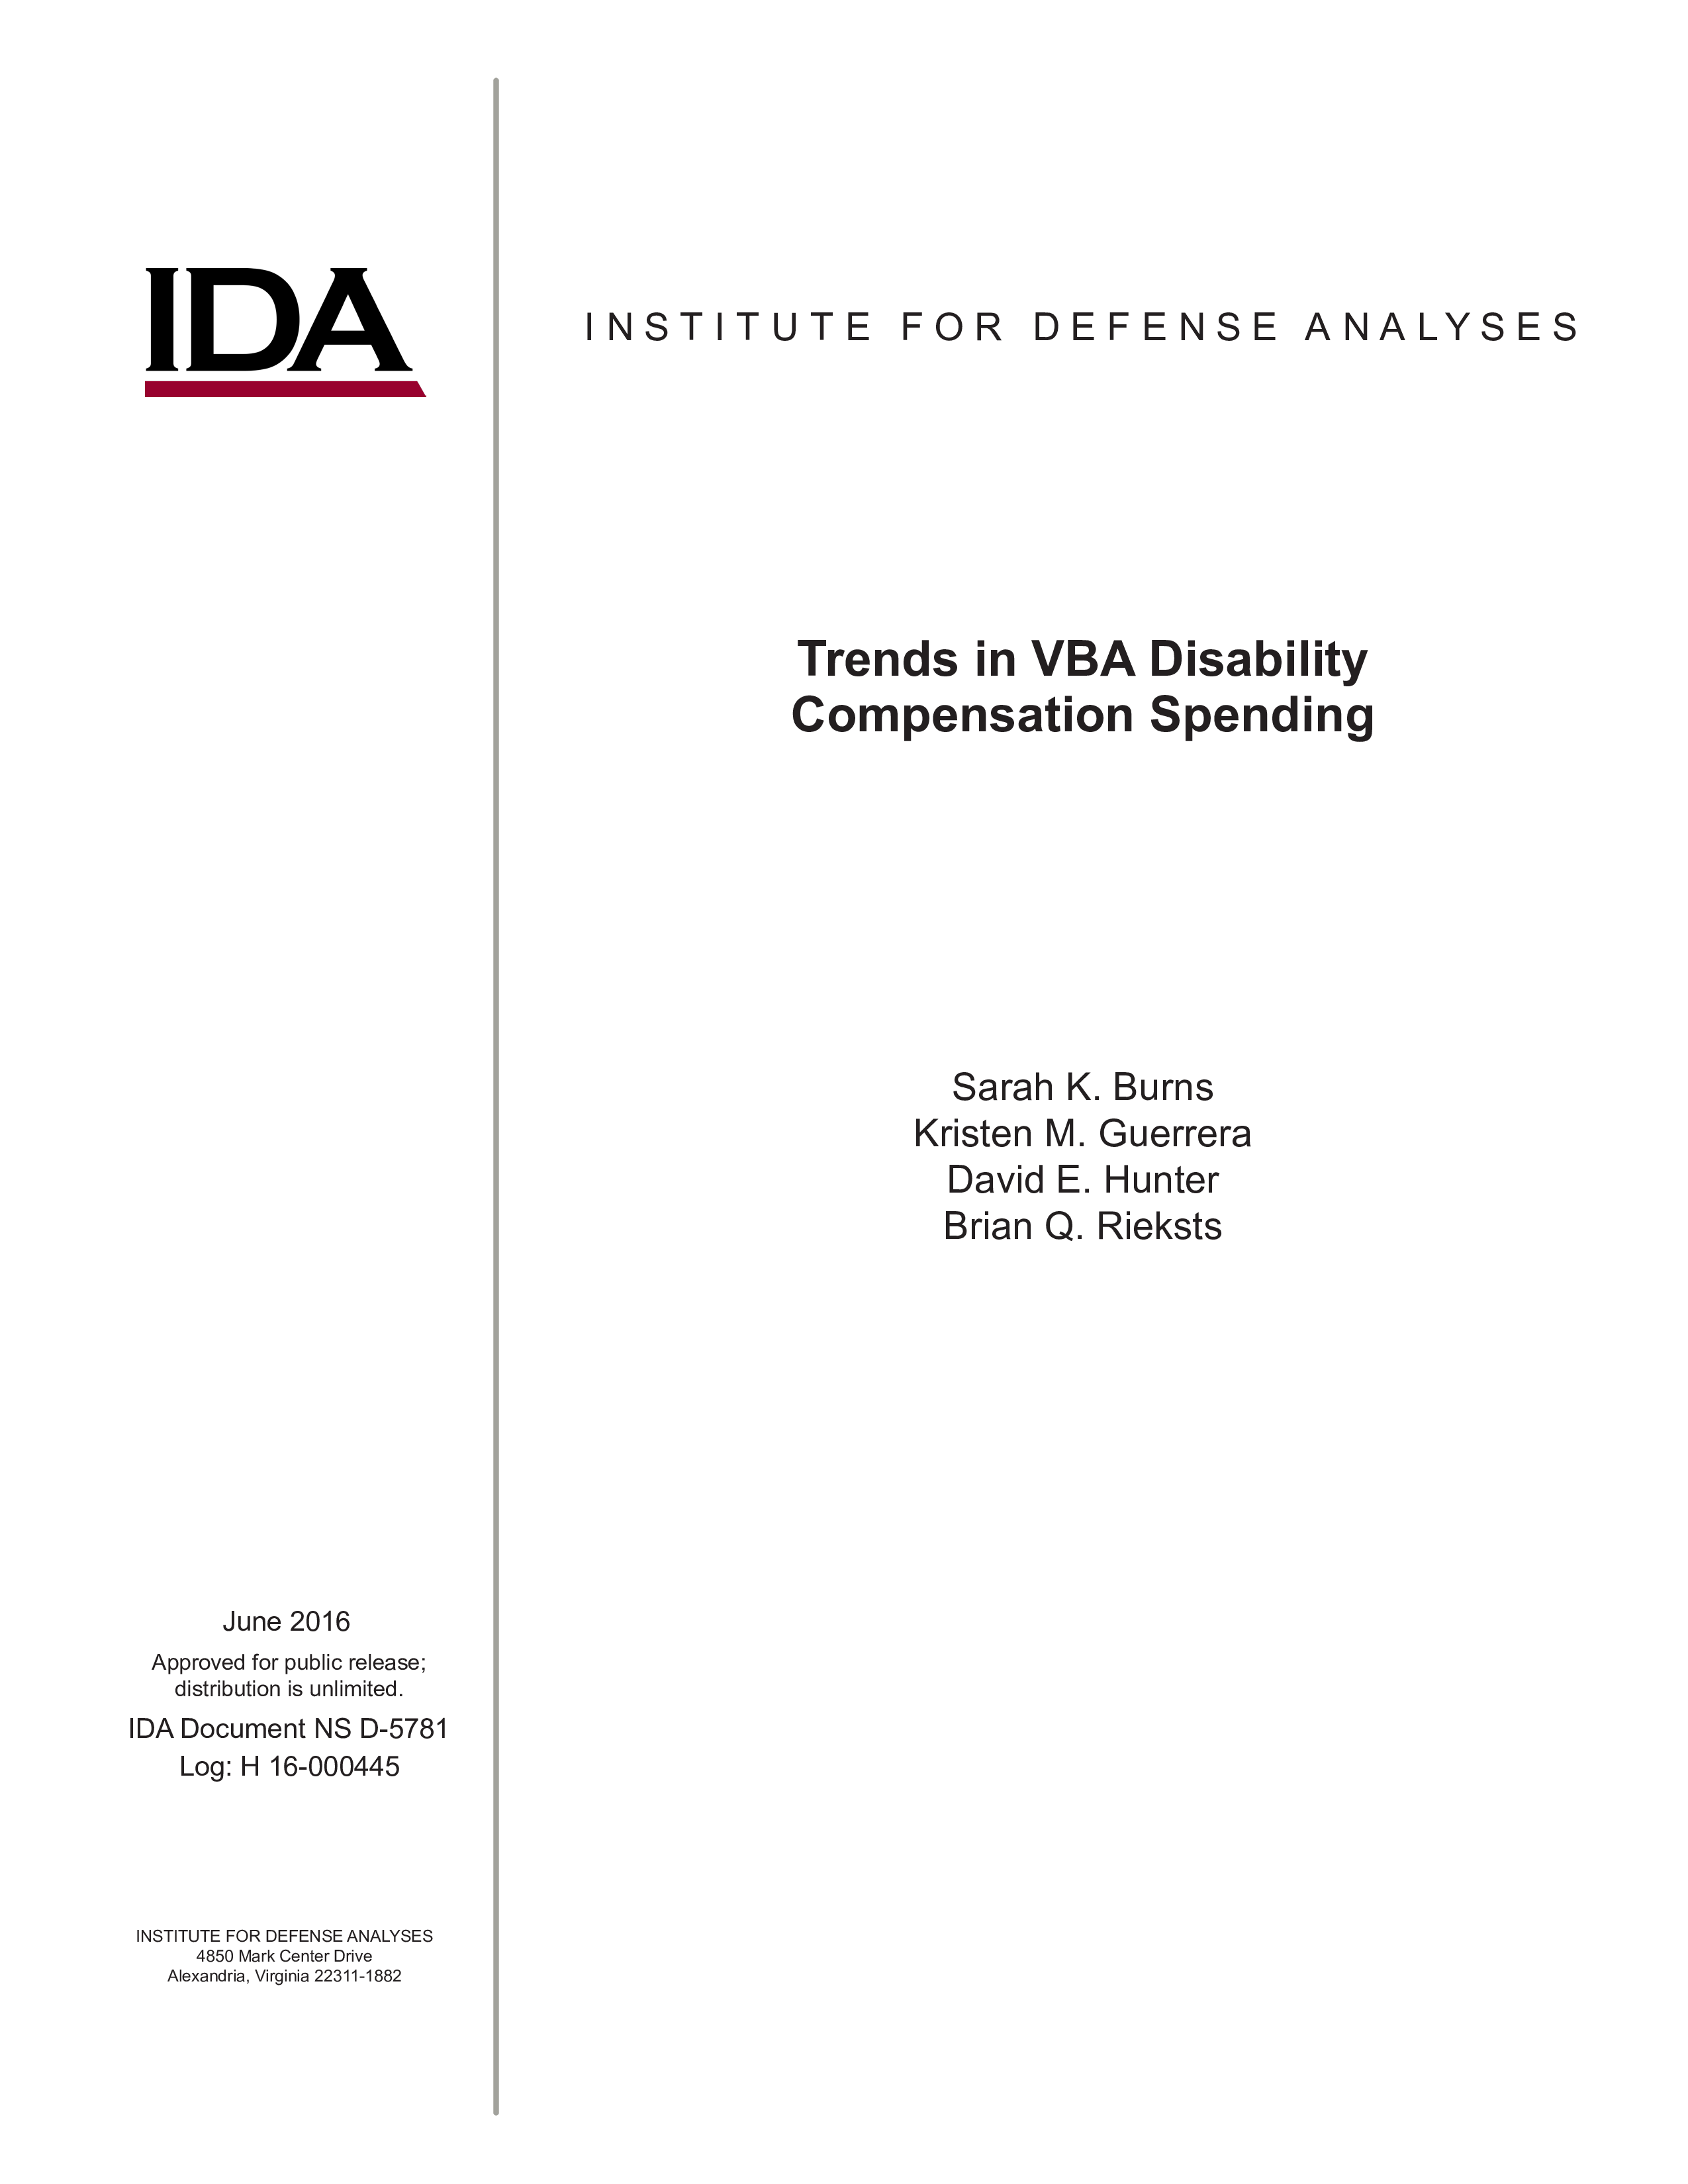 Trends in VBA Disability Compensation Spending